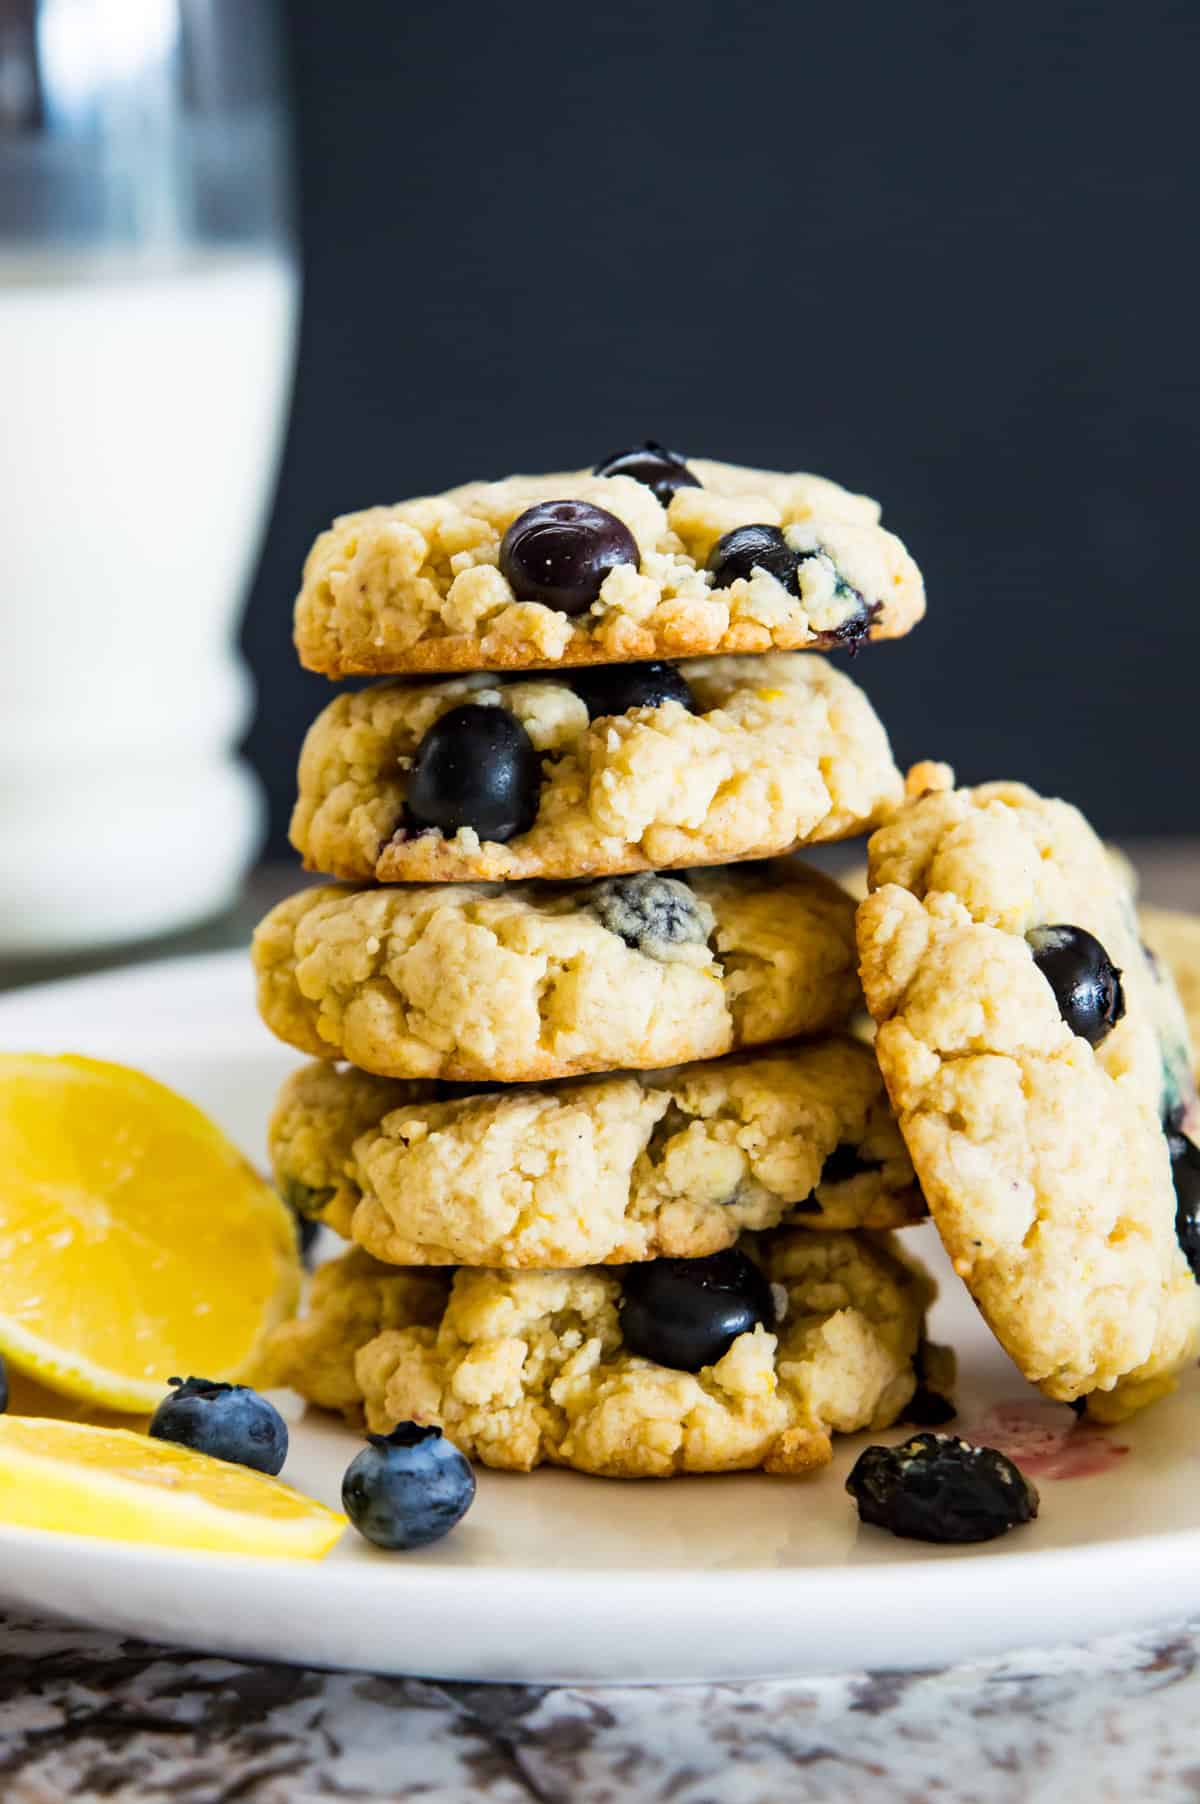 A stack of lemon blueberry cookies on a plate with a glass of milk behind it.